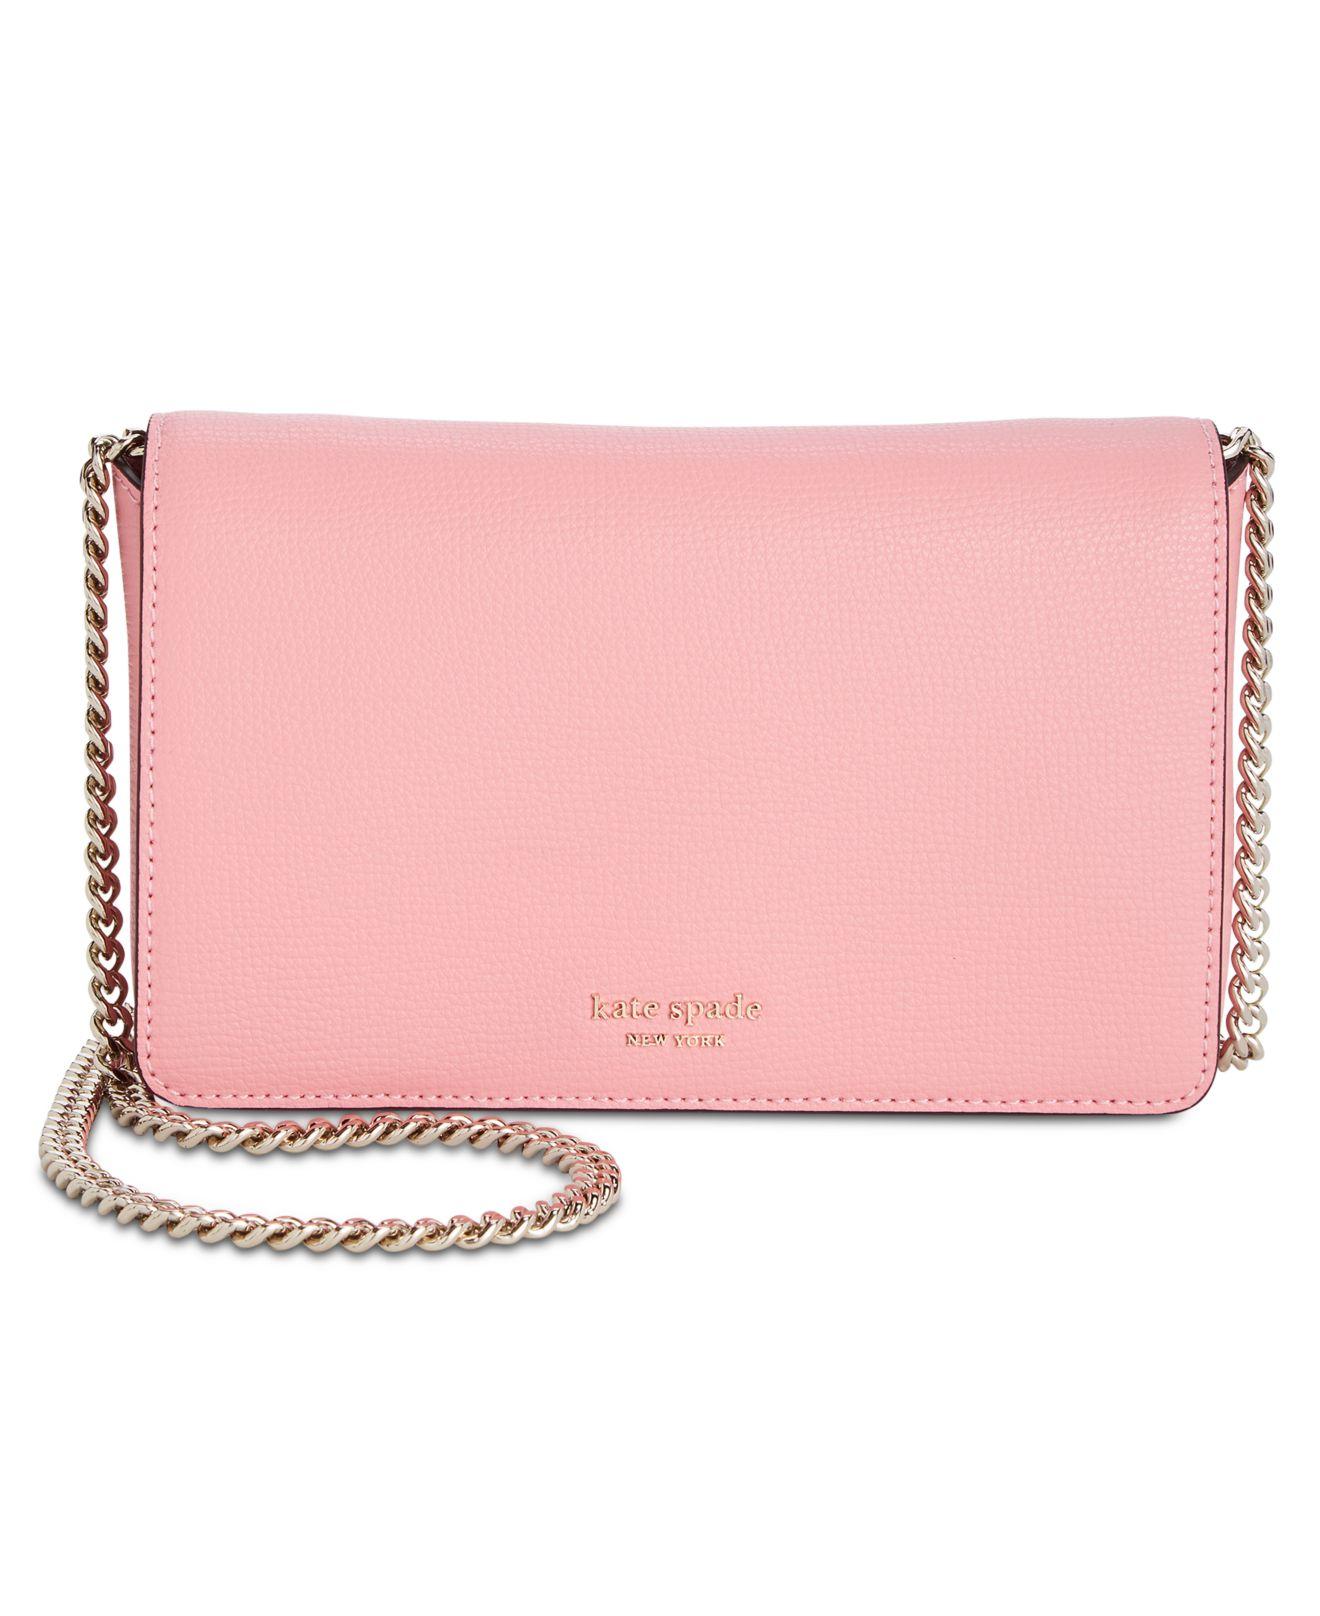 Kate Spade Synthetic Sylvia Chain Crossbody Wallet in Rococo Pink/Gold (Pink) - Lyst